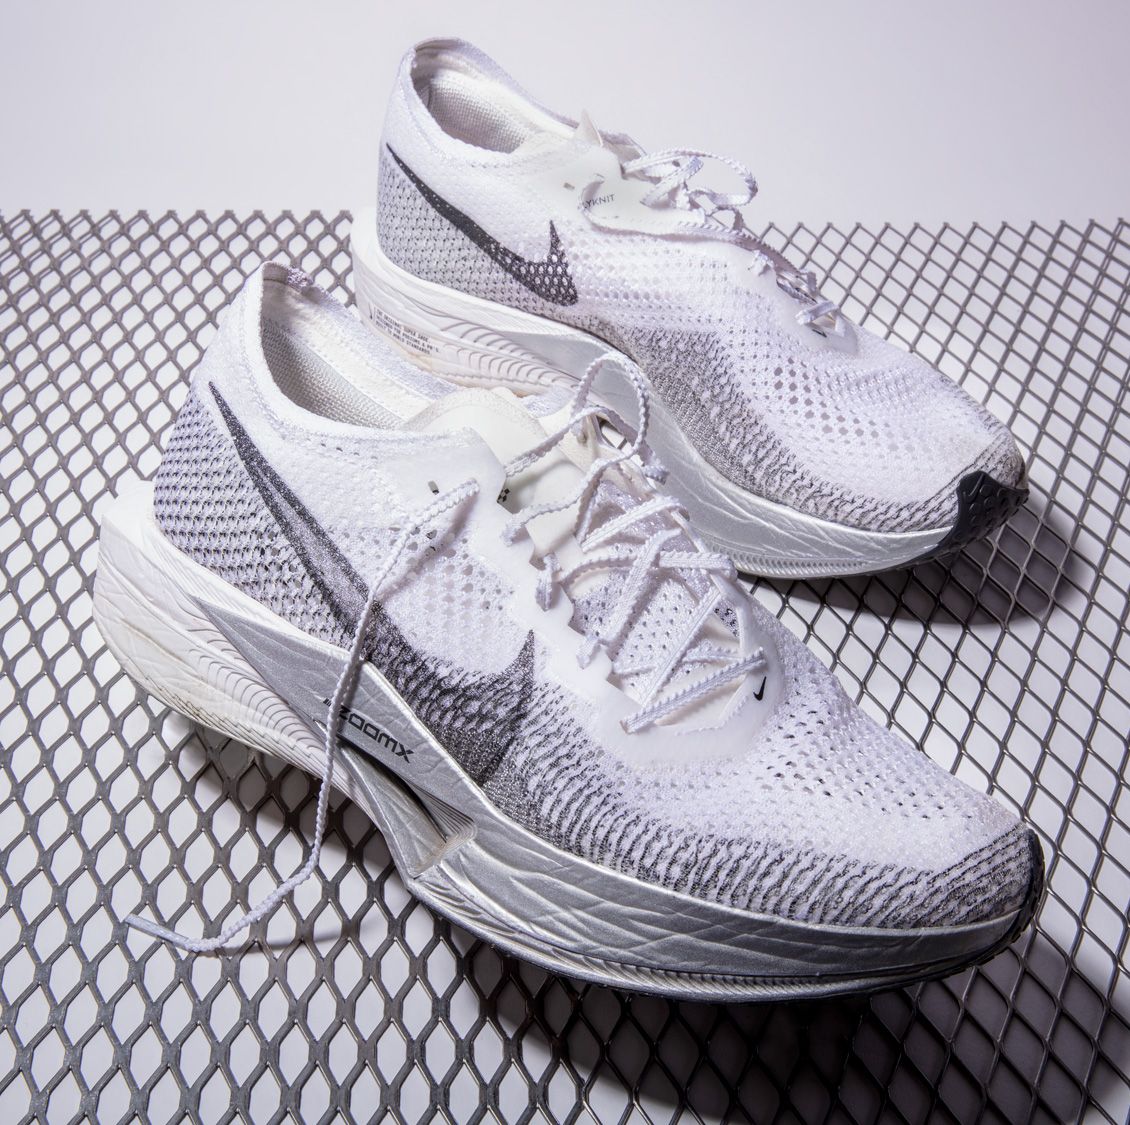 Nike Vaporfly 3 Tested the Fastest Racer